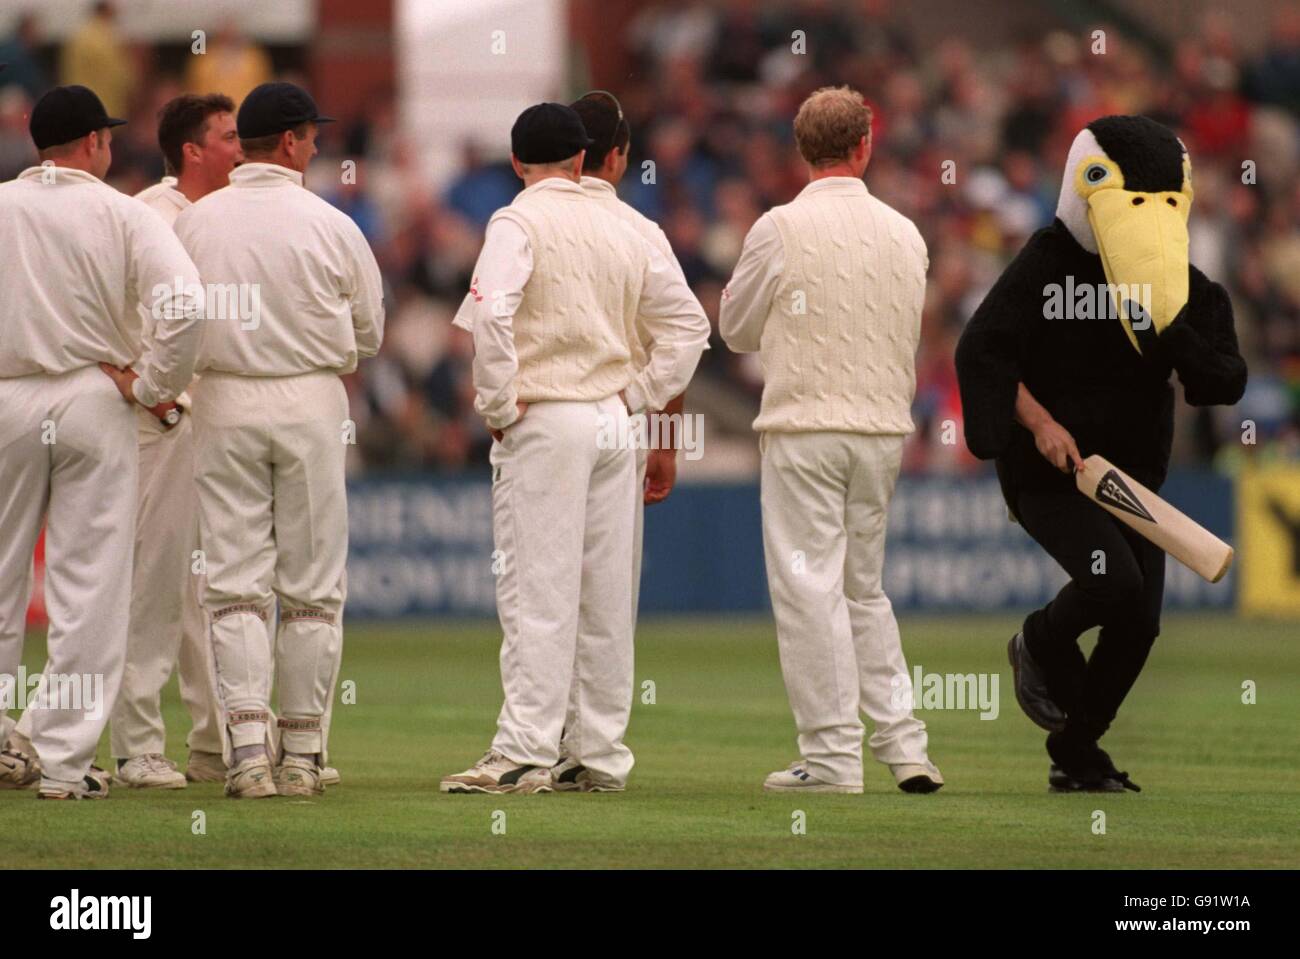 The England players watch a fan dressed in a Pingu outfit steal a bat and run on to the crease at Old Trafford Stock Photo